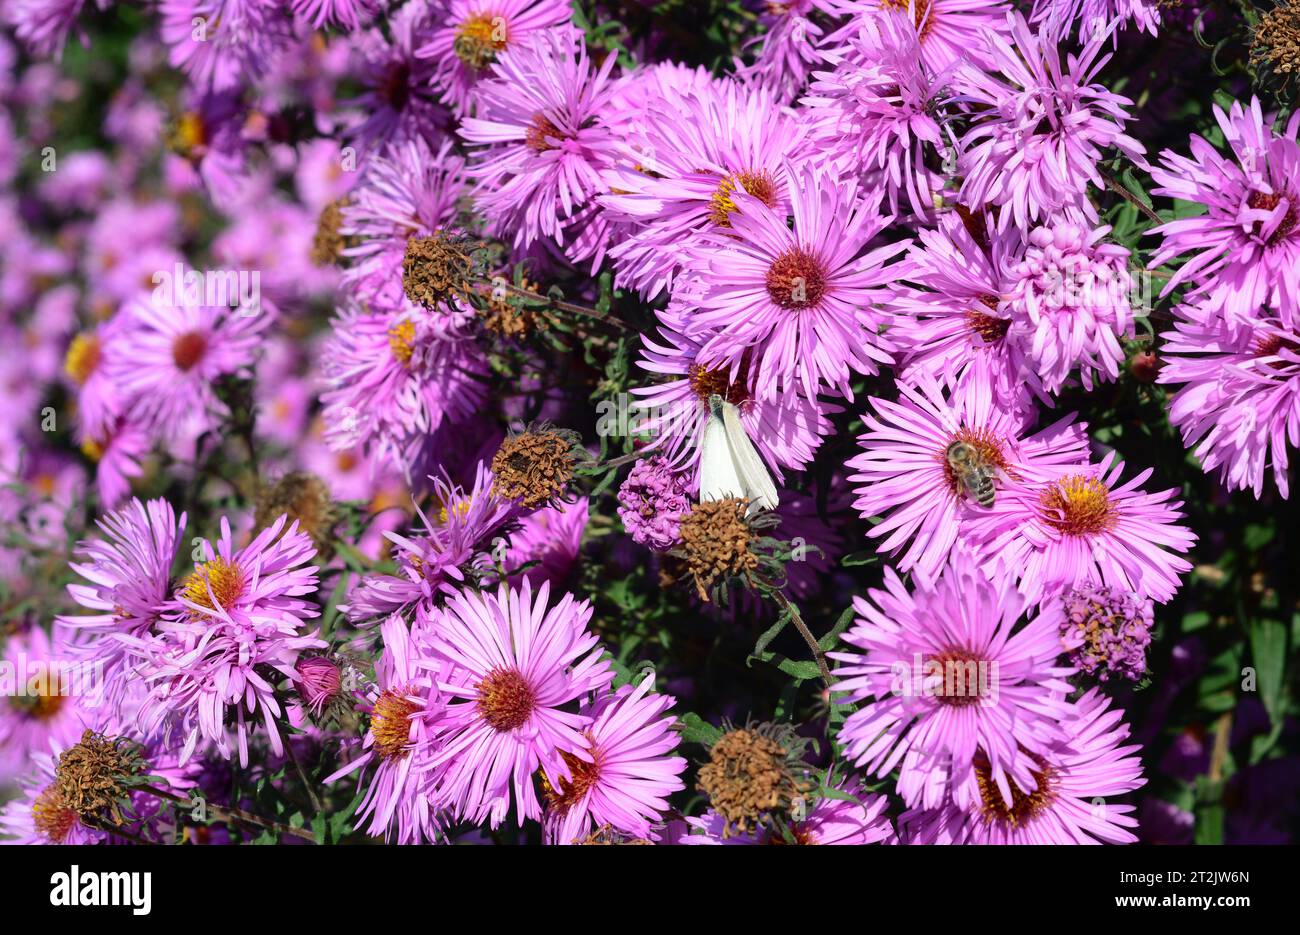 A close-up on a pink aster dumosus flowering plant, tansy leaf aster (Machaeranthera tanacetifolia), bushy aster richly blooming in autumn. Gardening Stock Photo